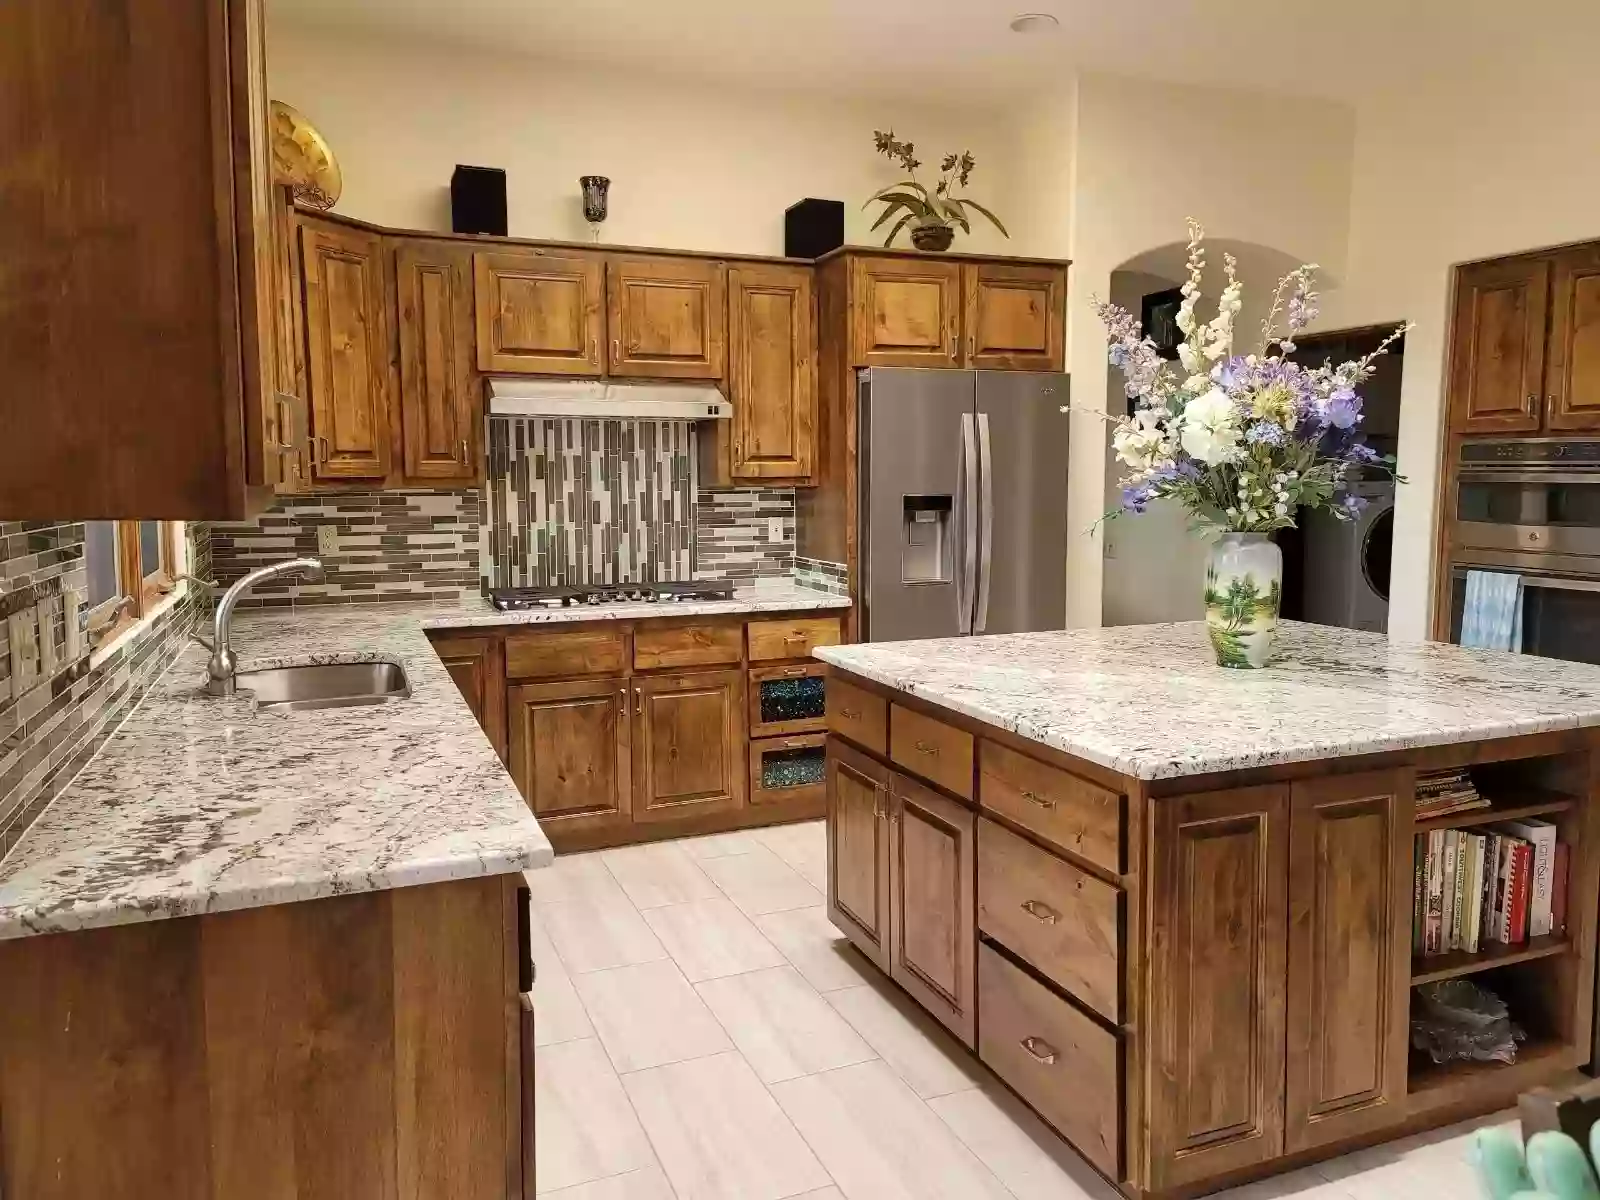 Southwest Countertops & Cabinetry, LLC